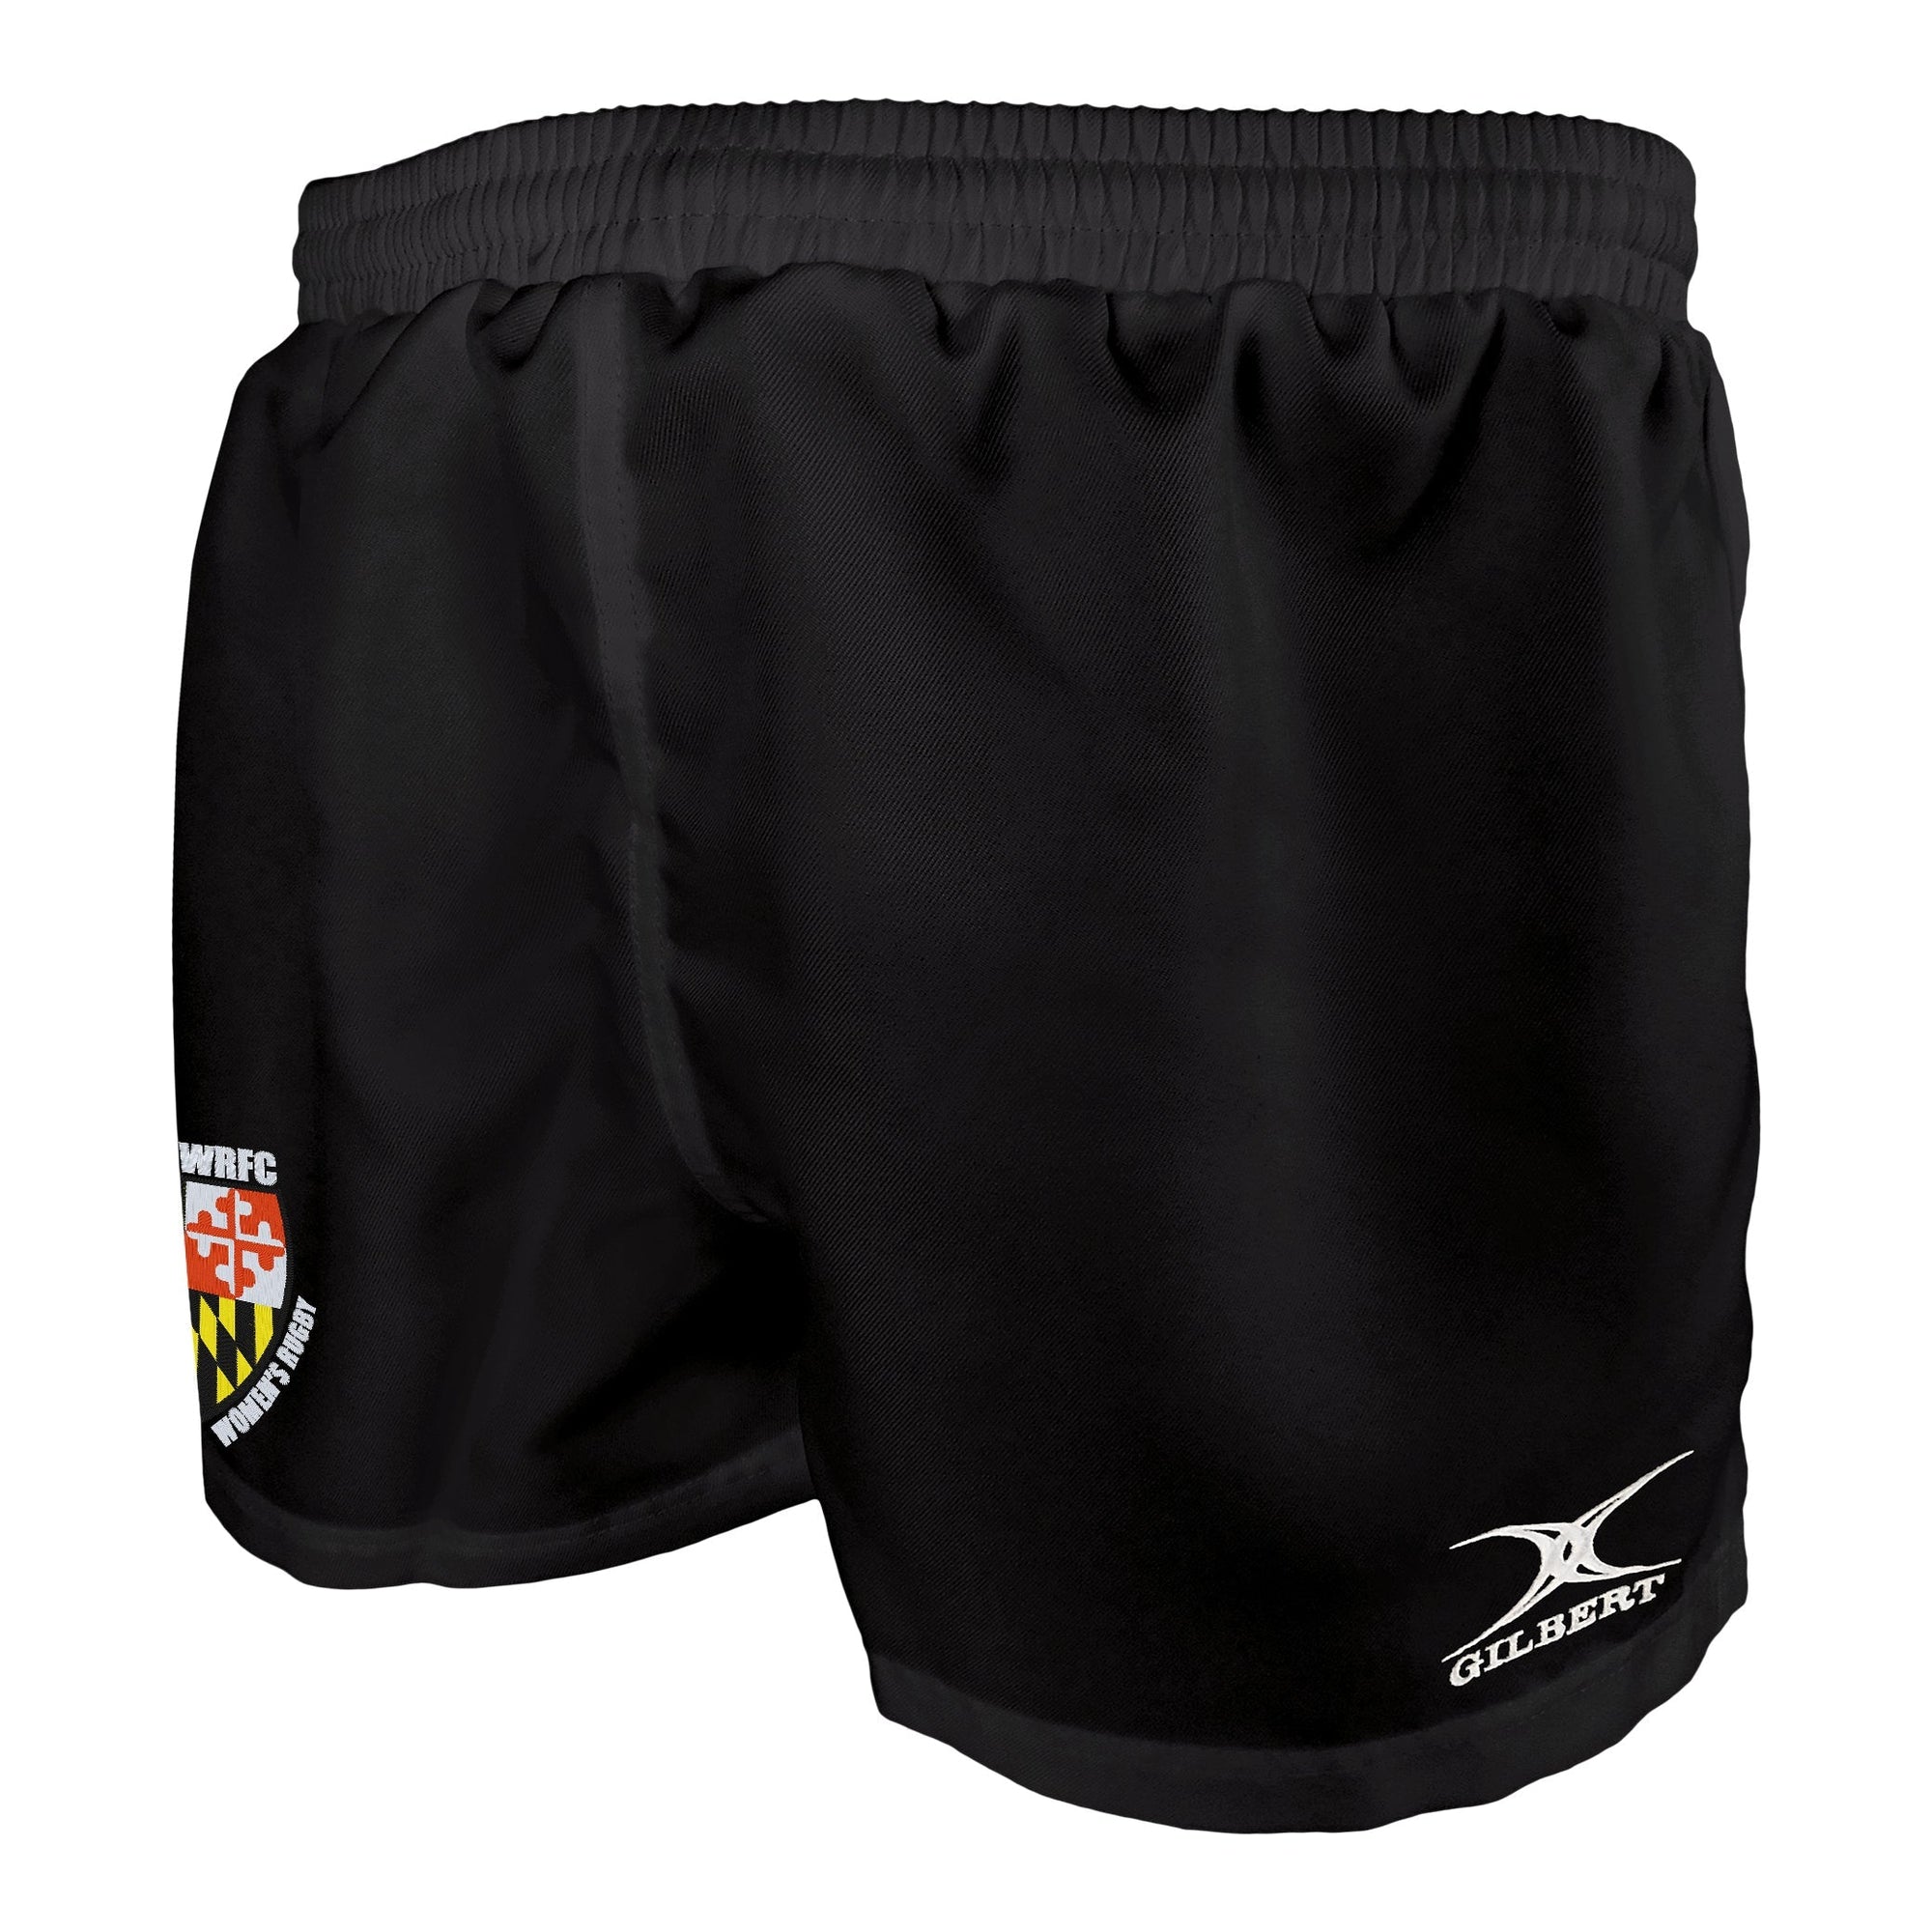 Rugby Imports UMD WRFC Saracen Rugby Shorts